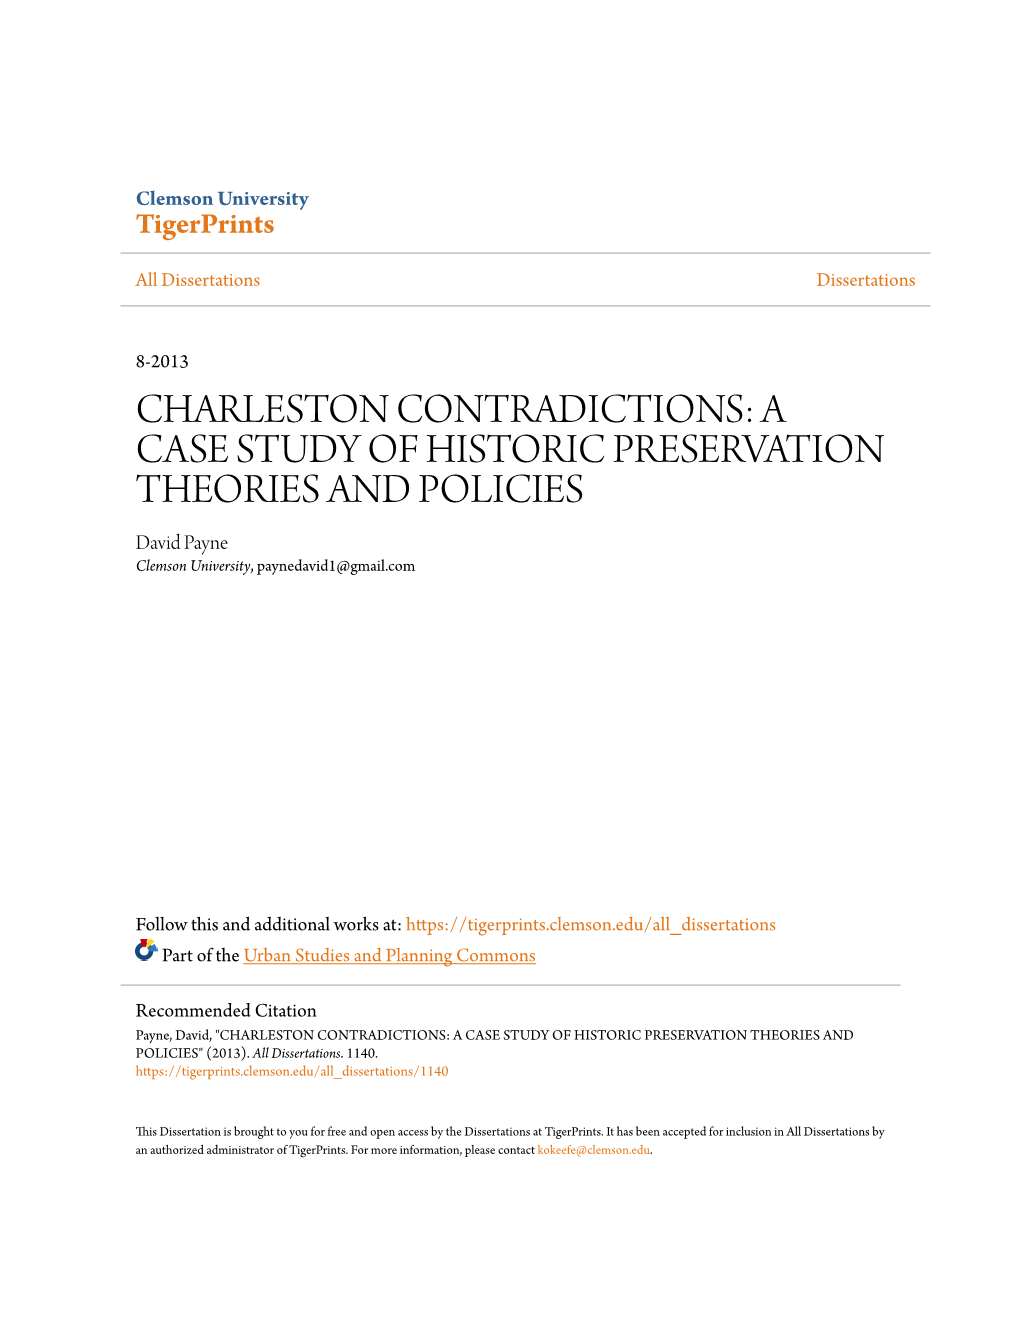 CHARLESTON CONTRADICTIONS: a CASE STUDY of HISTORIC PRESERVATION THEORIES and POLICIES David Payne Clemson University, Paynedavid1@Gmail.Com